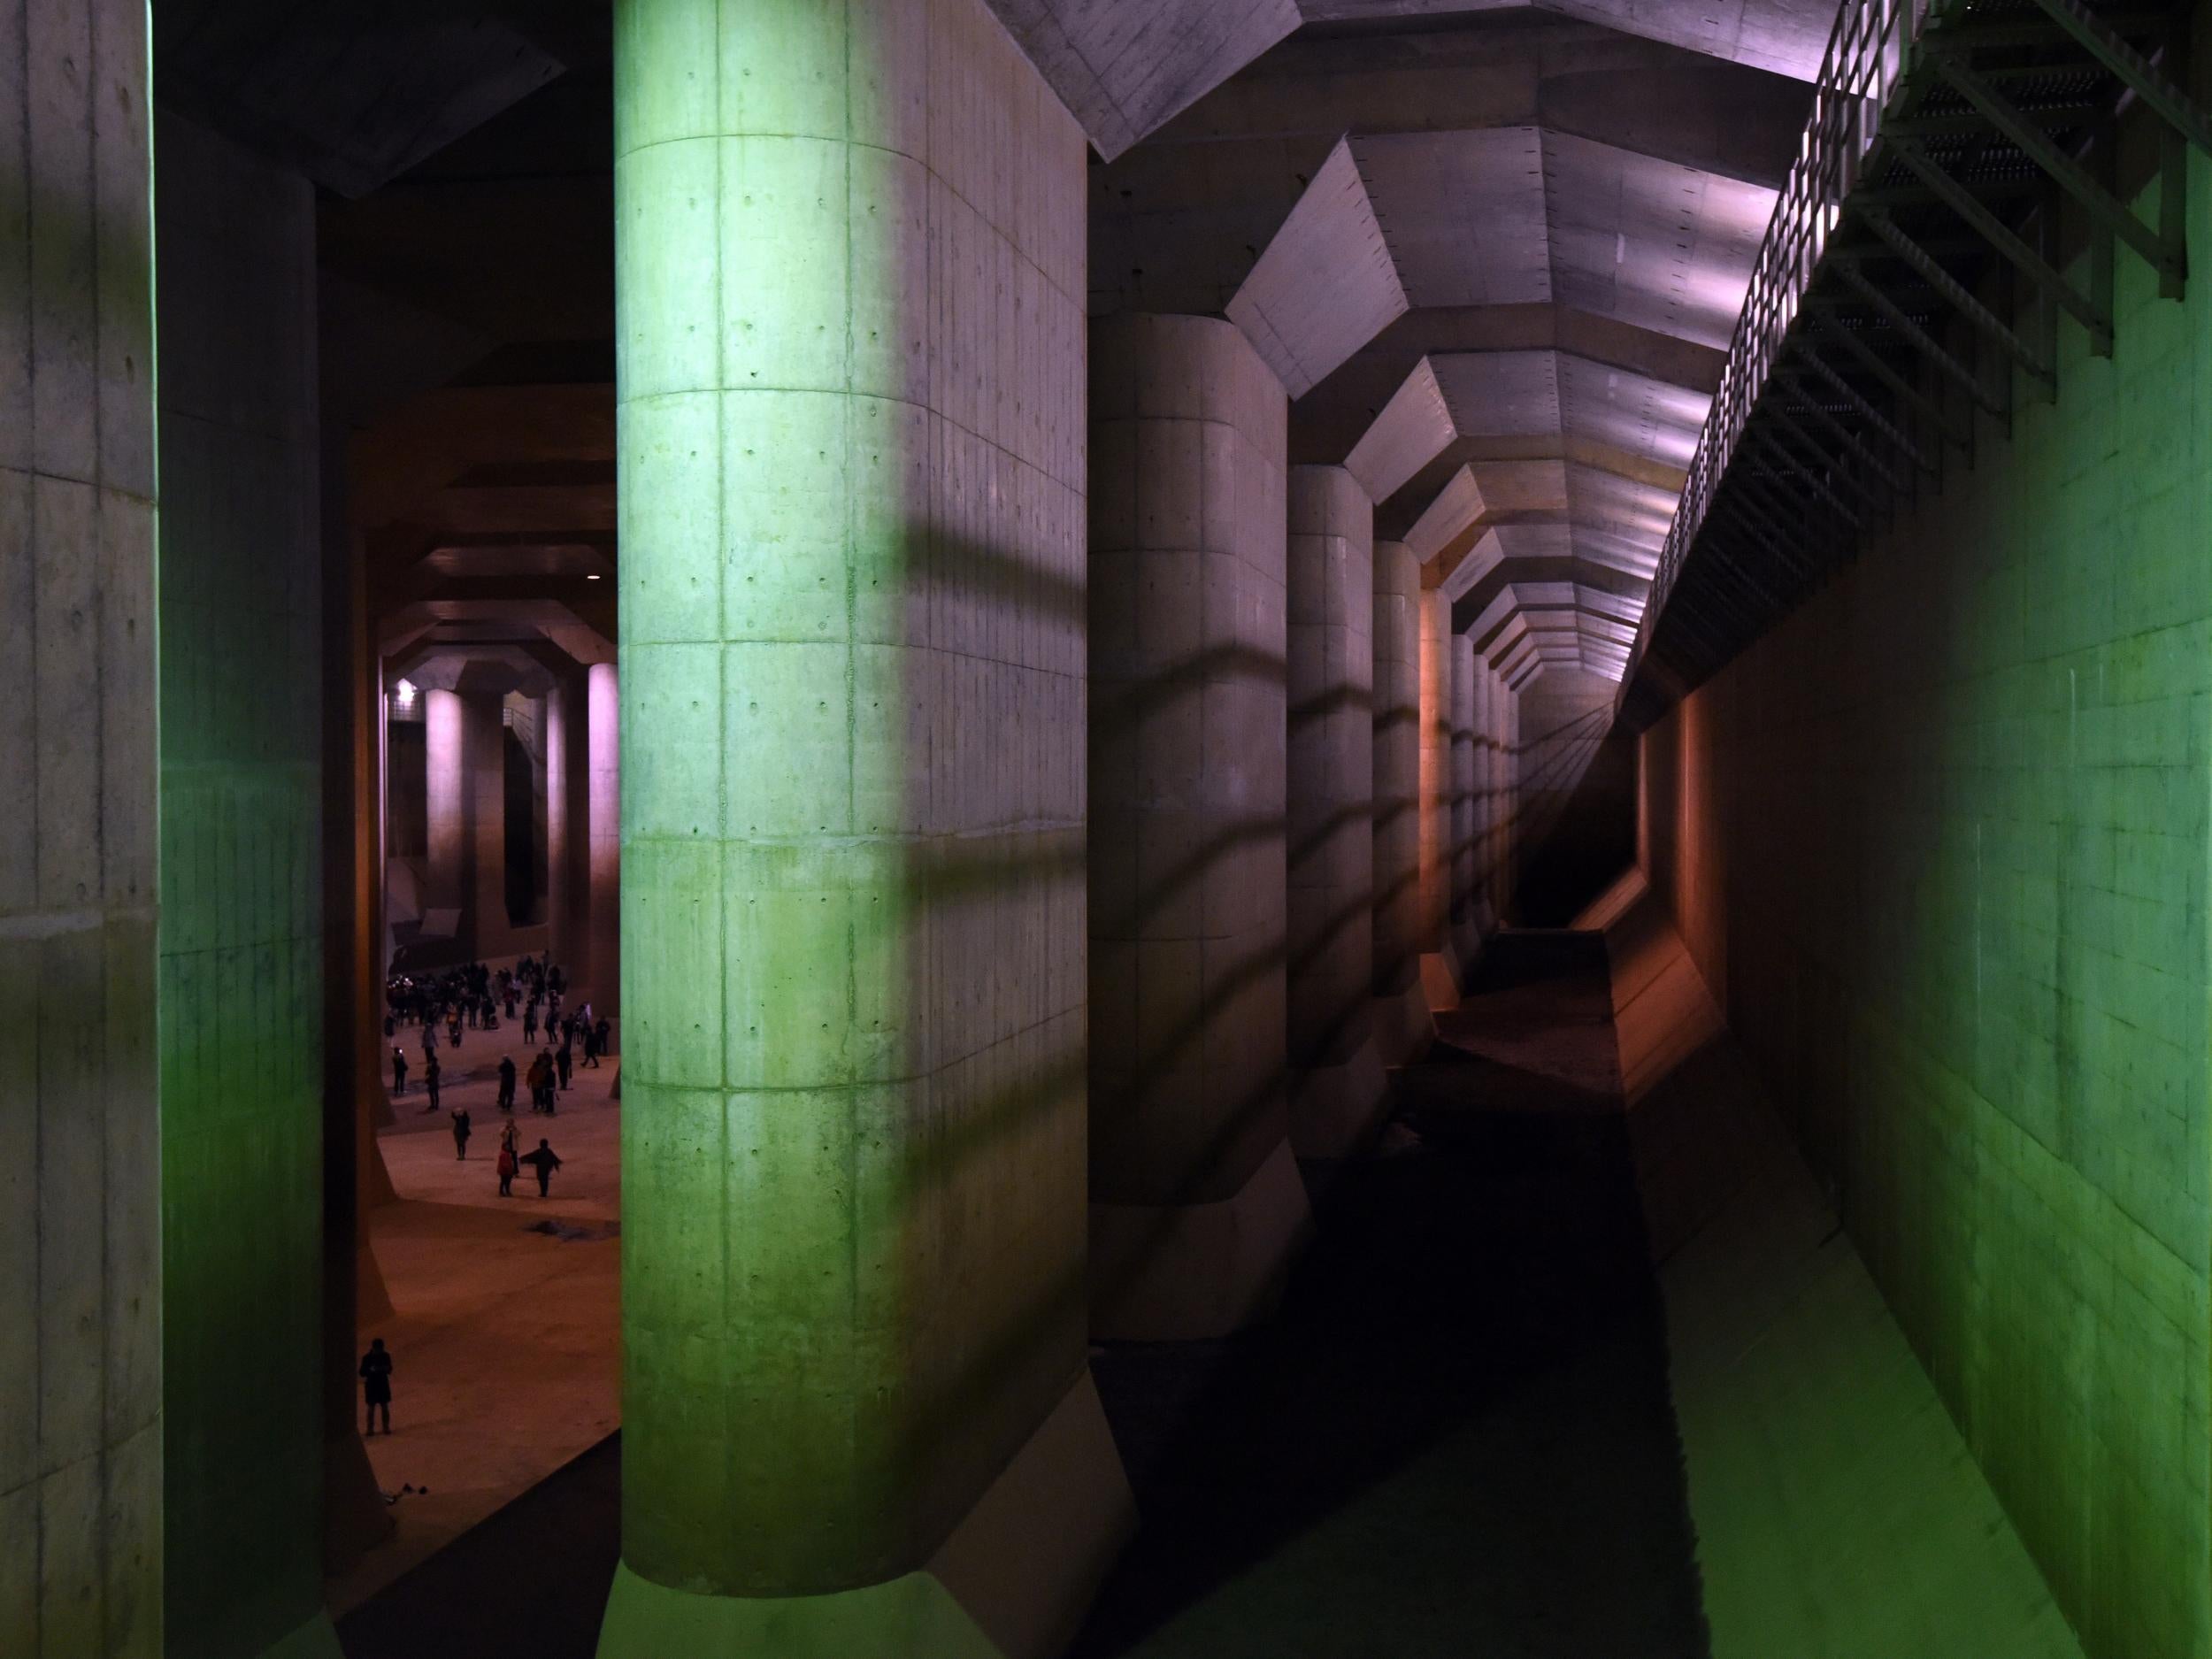 Underground cisterns almost 250 feet deep take in stormwater from four rivers north of Tokyo